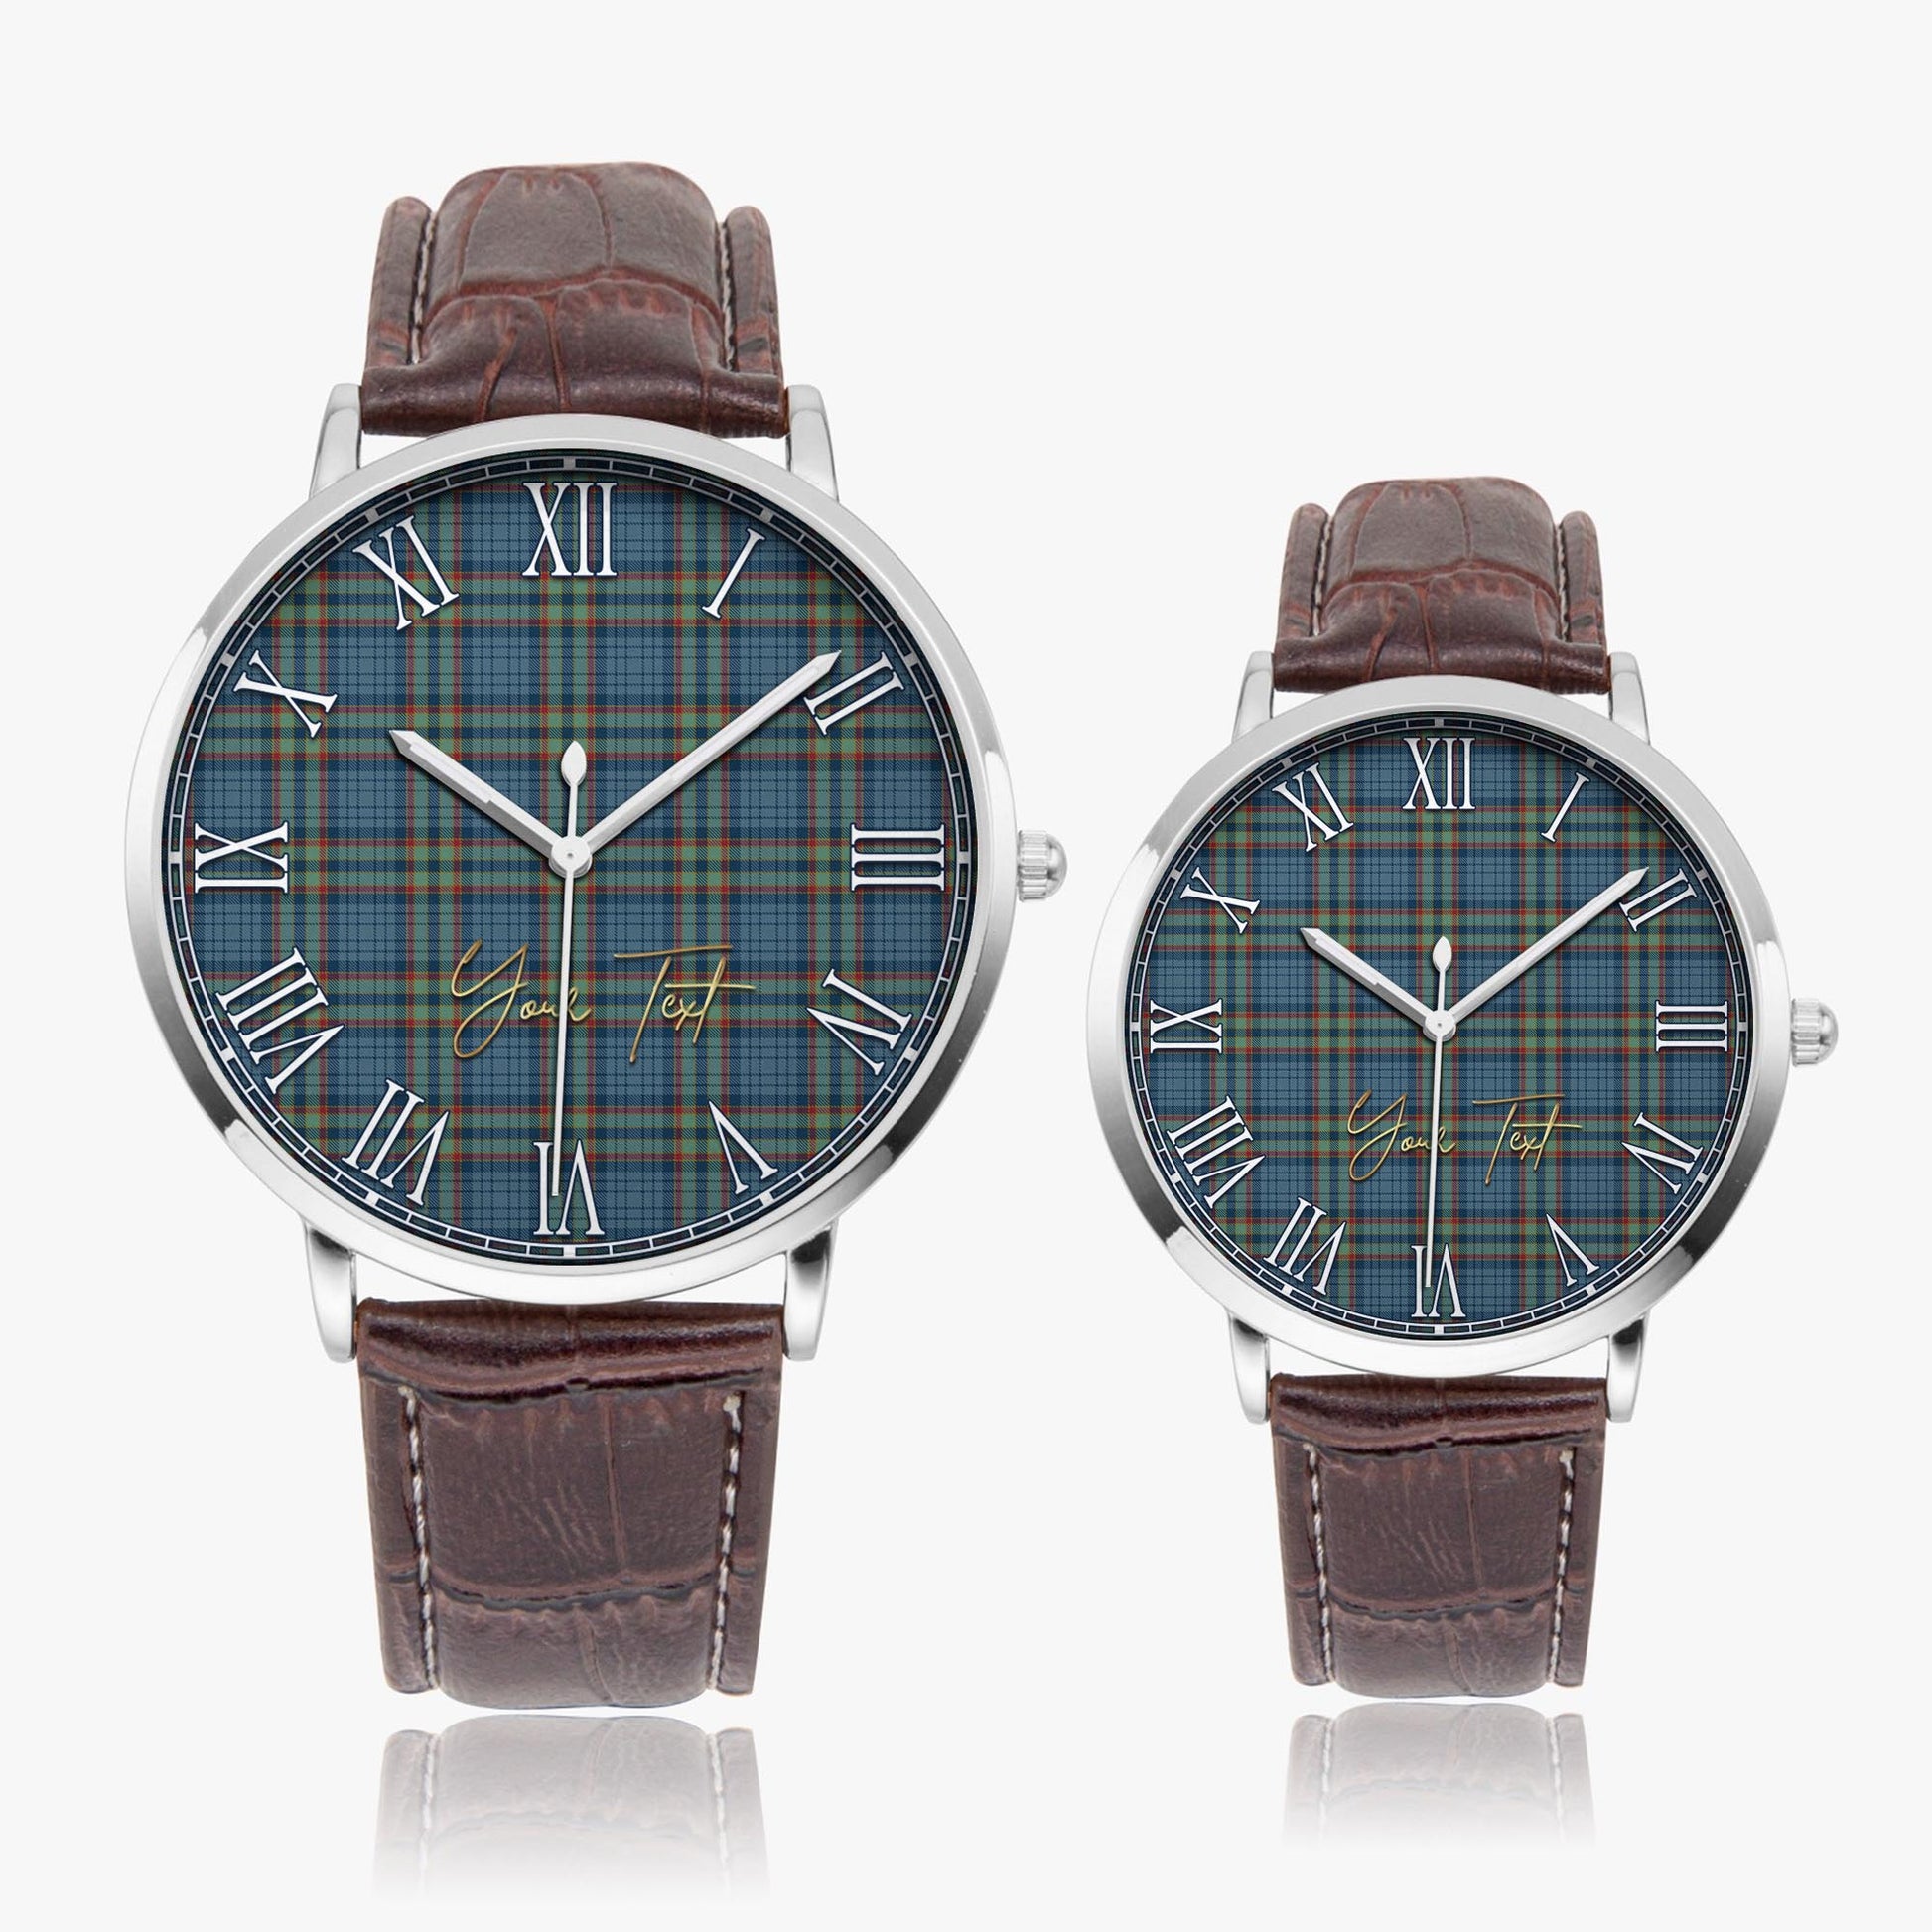 Ralston UK Tartan Personalized Your Text Leather Trap Quartz Watch Ultra Thin Silver Case With Brown Leather Strap - Tartanvibesclothing